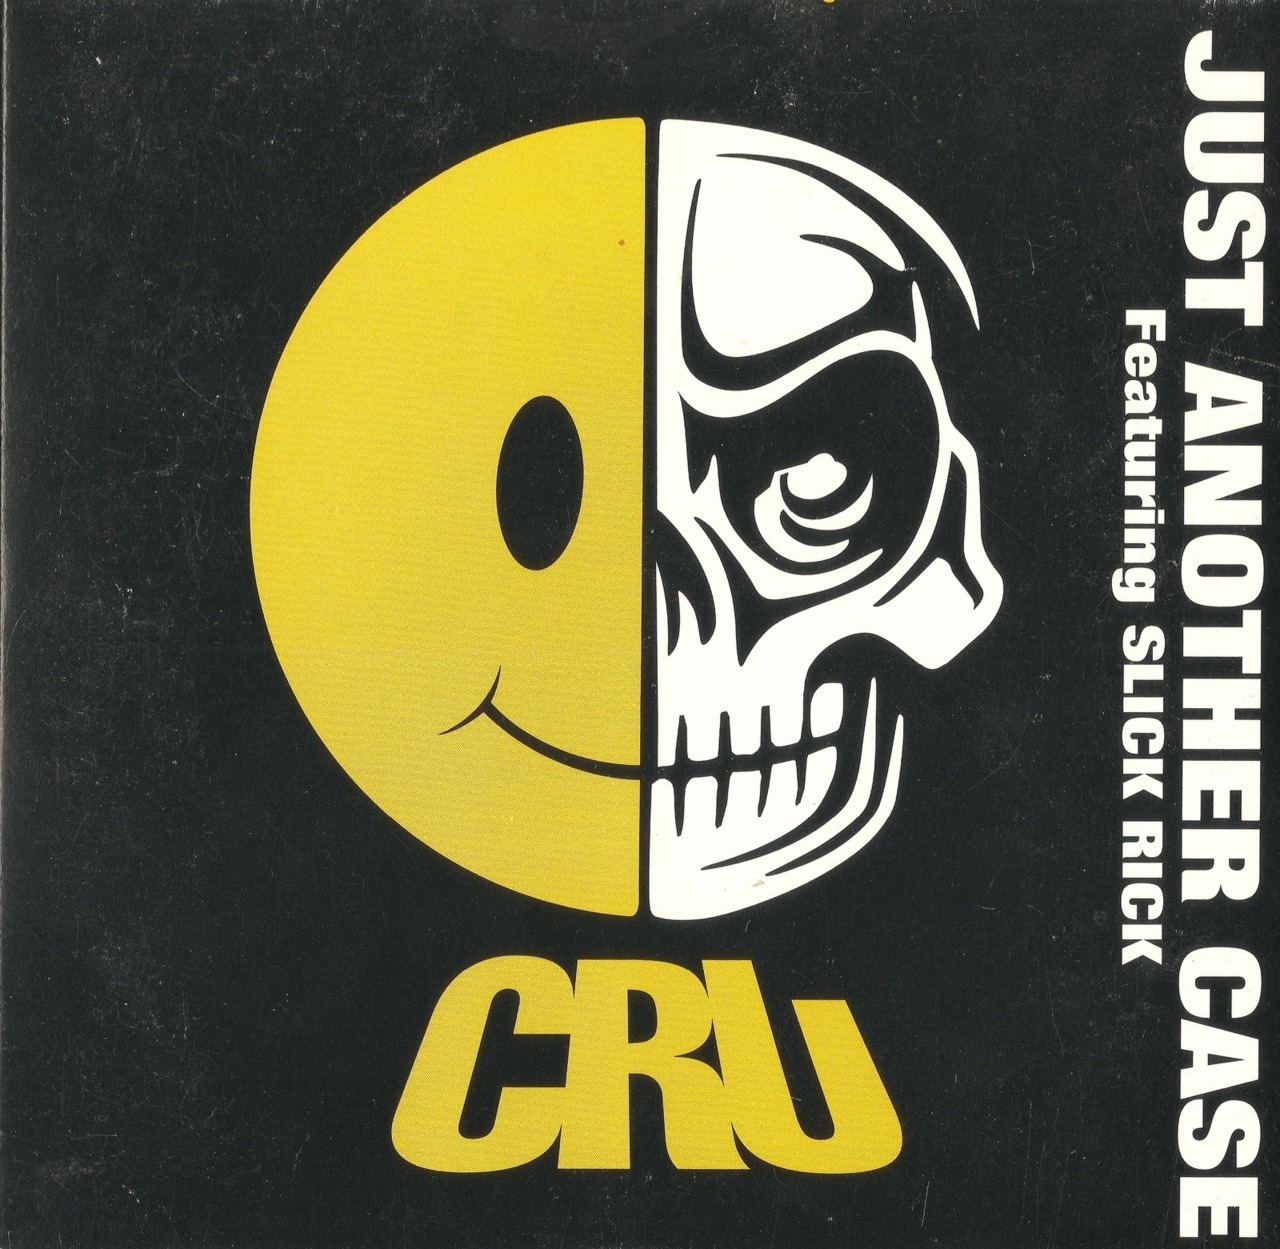  Cru feat. Slick Rick - Just Another Case  1 - Just Another Case [Radio Version]2